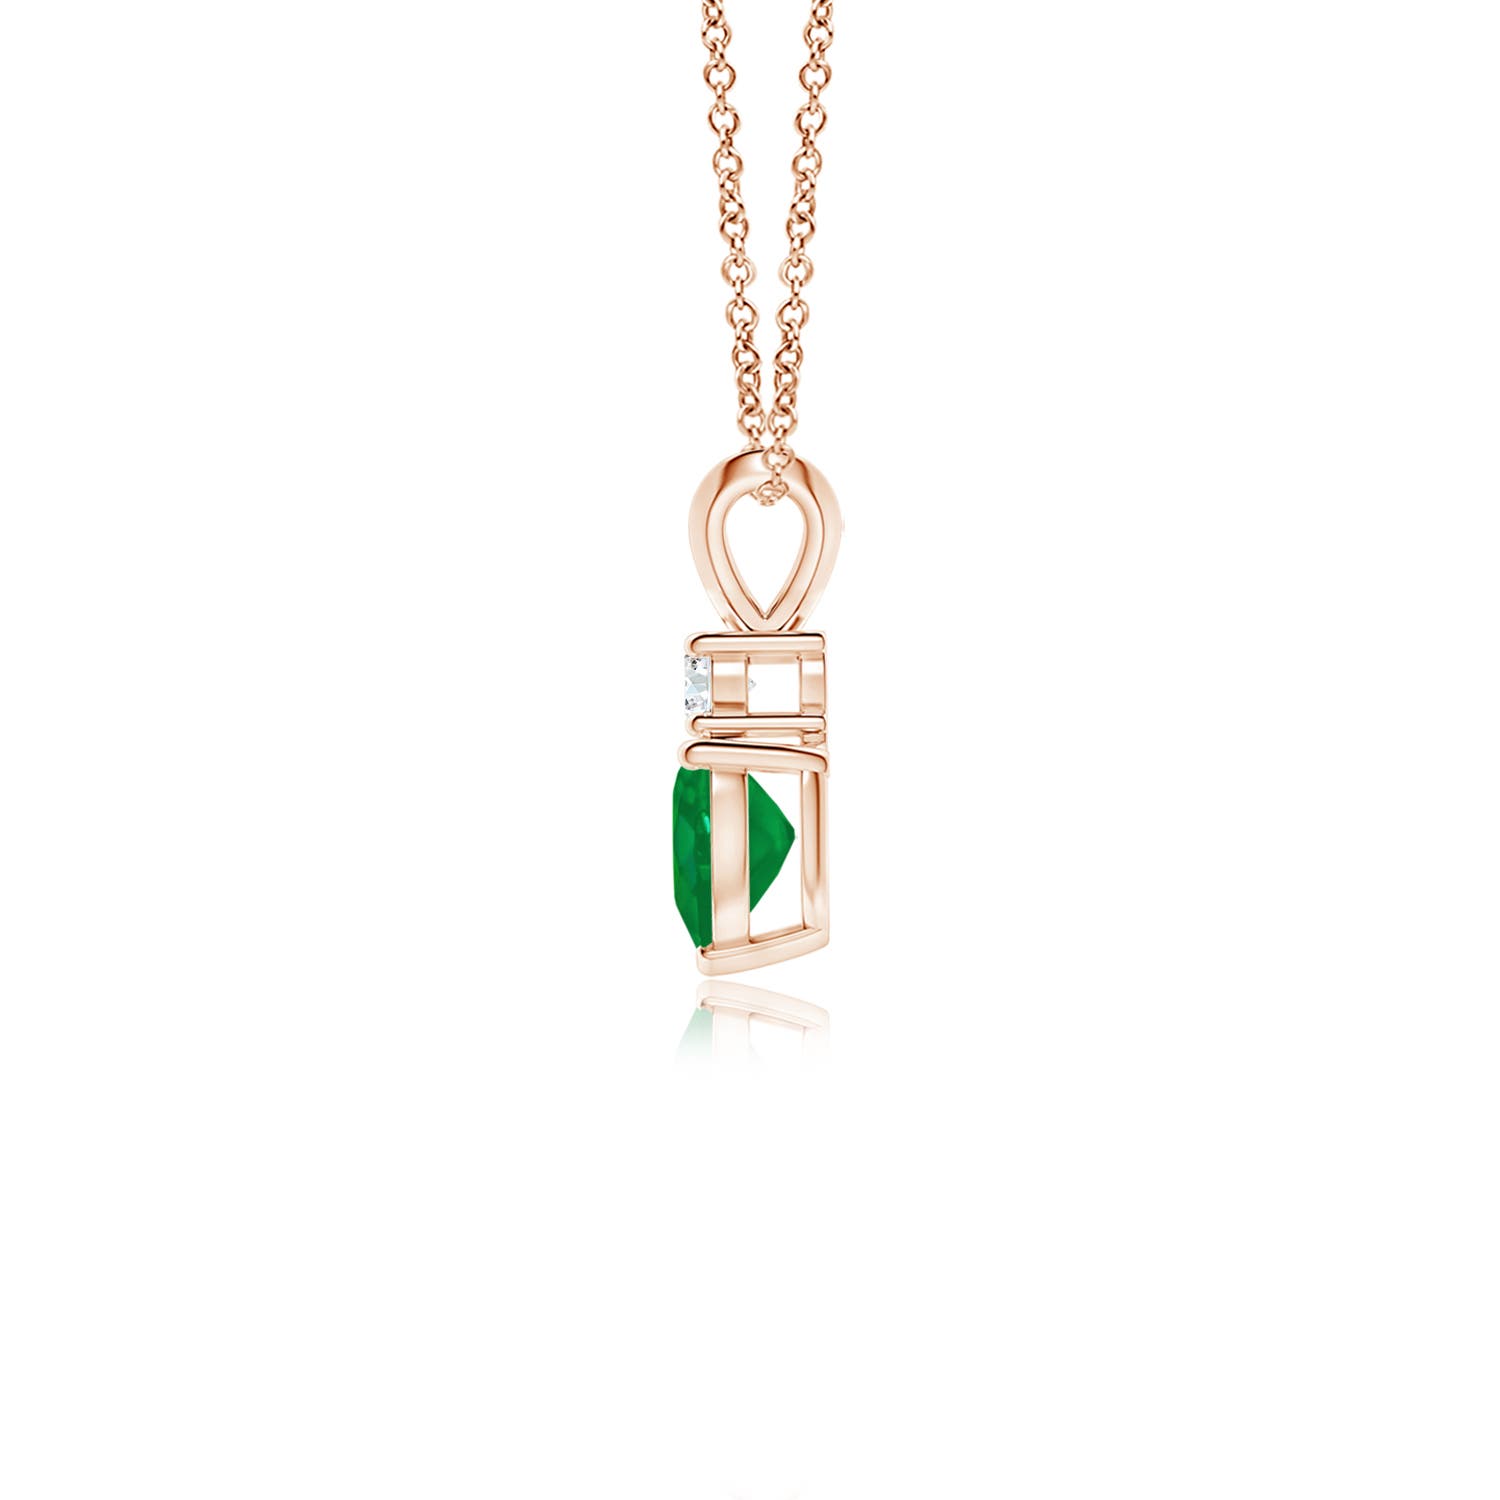 AA - Emerald / 0.44 CT / 14 KT Rose Gold